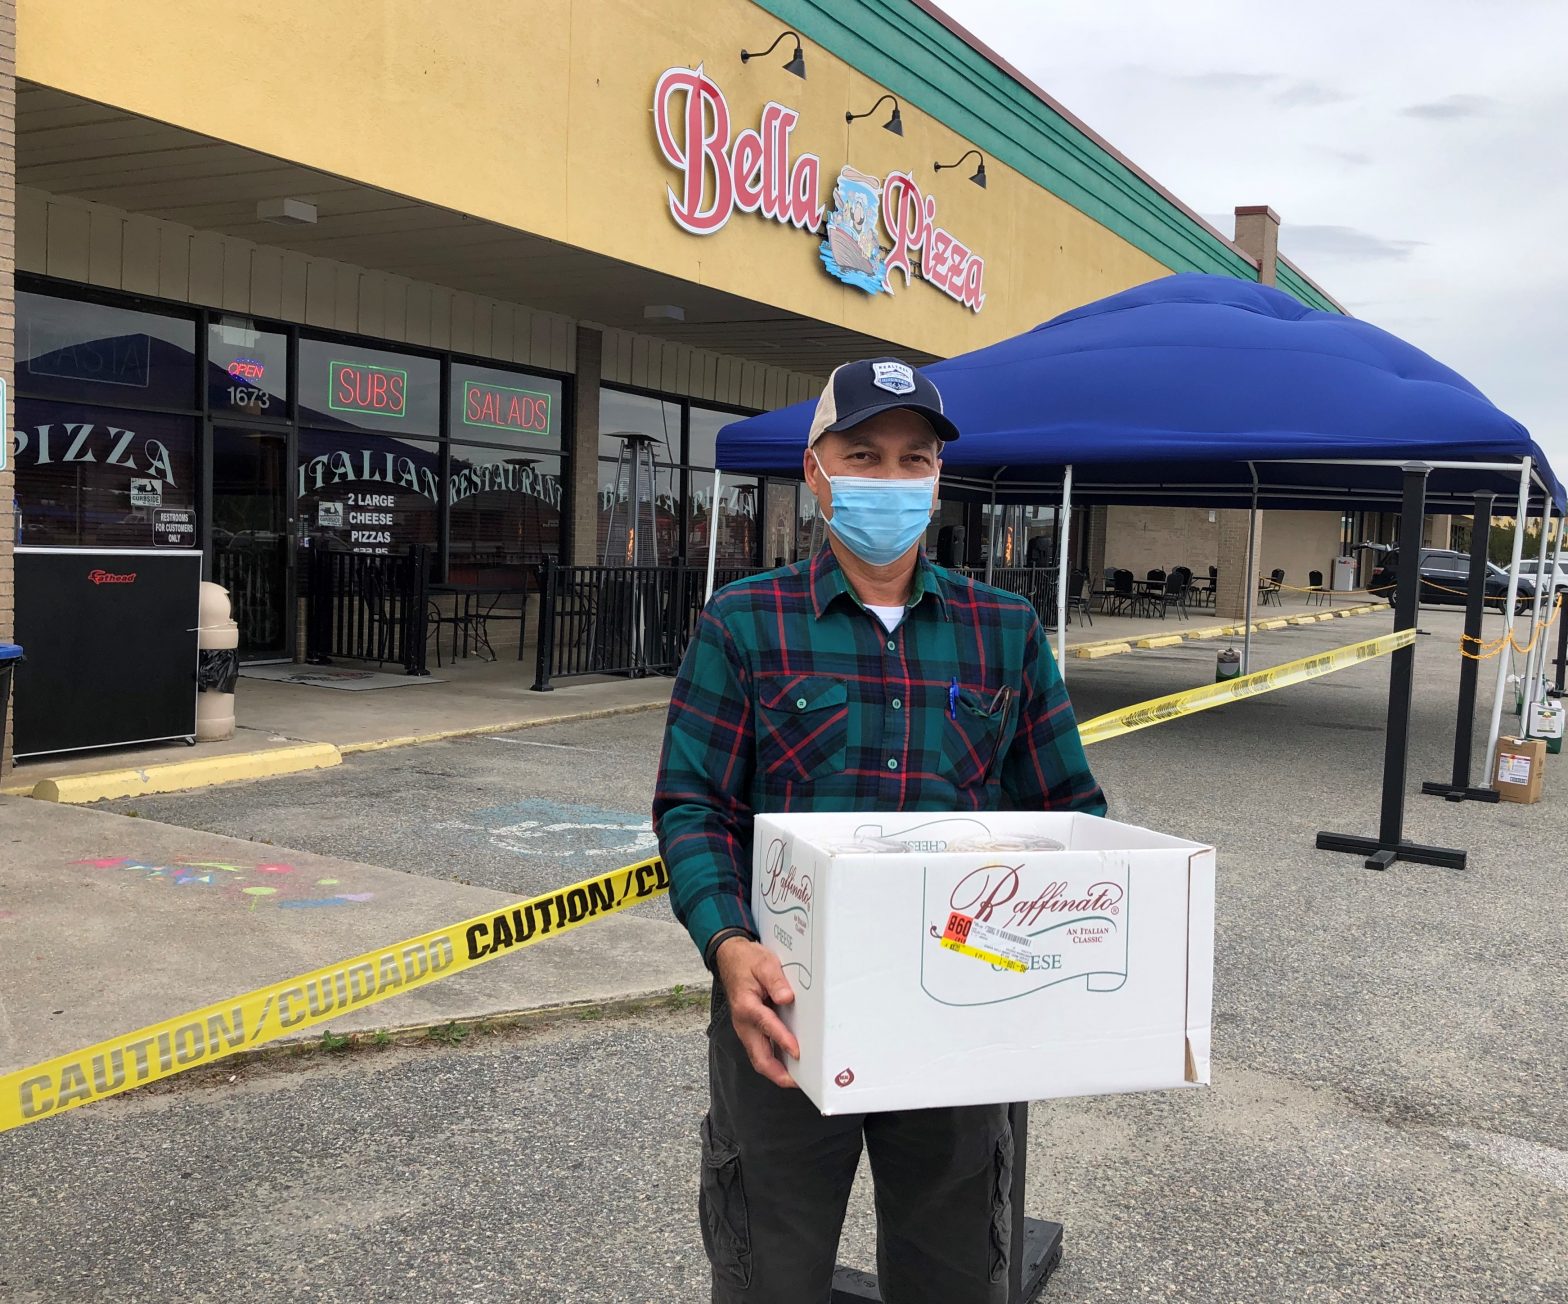 Man carrying box in front of store